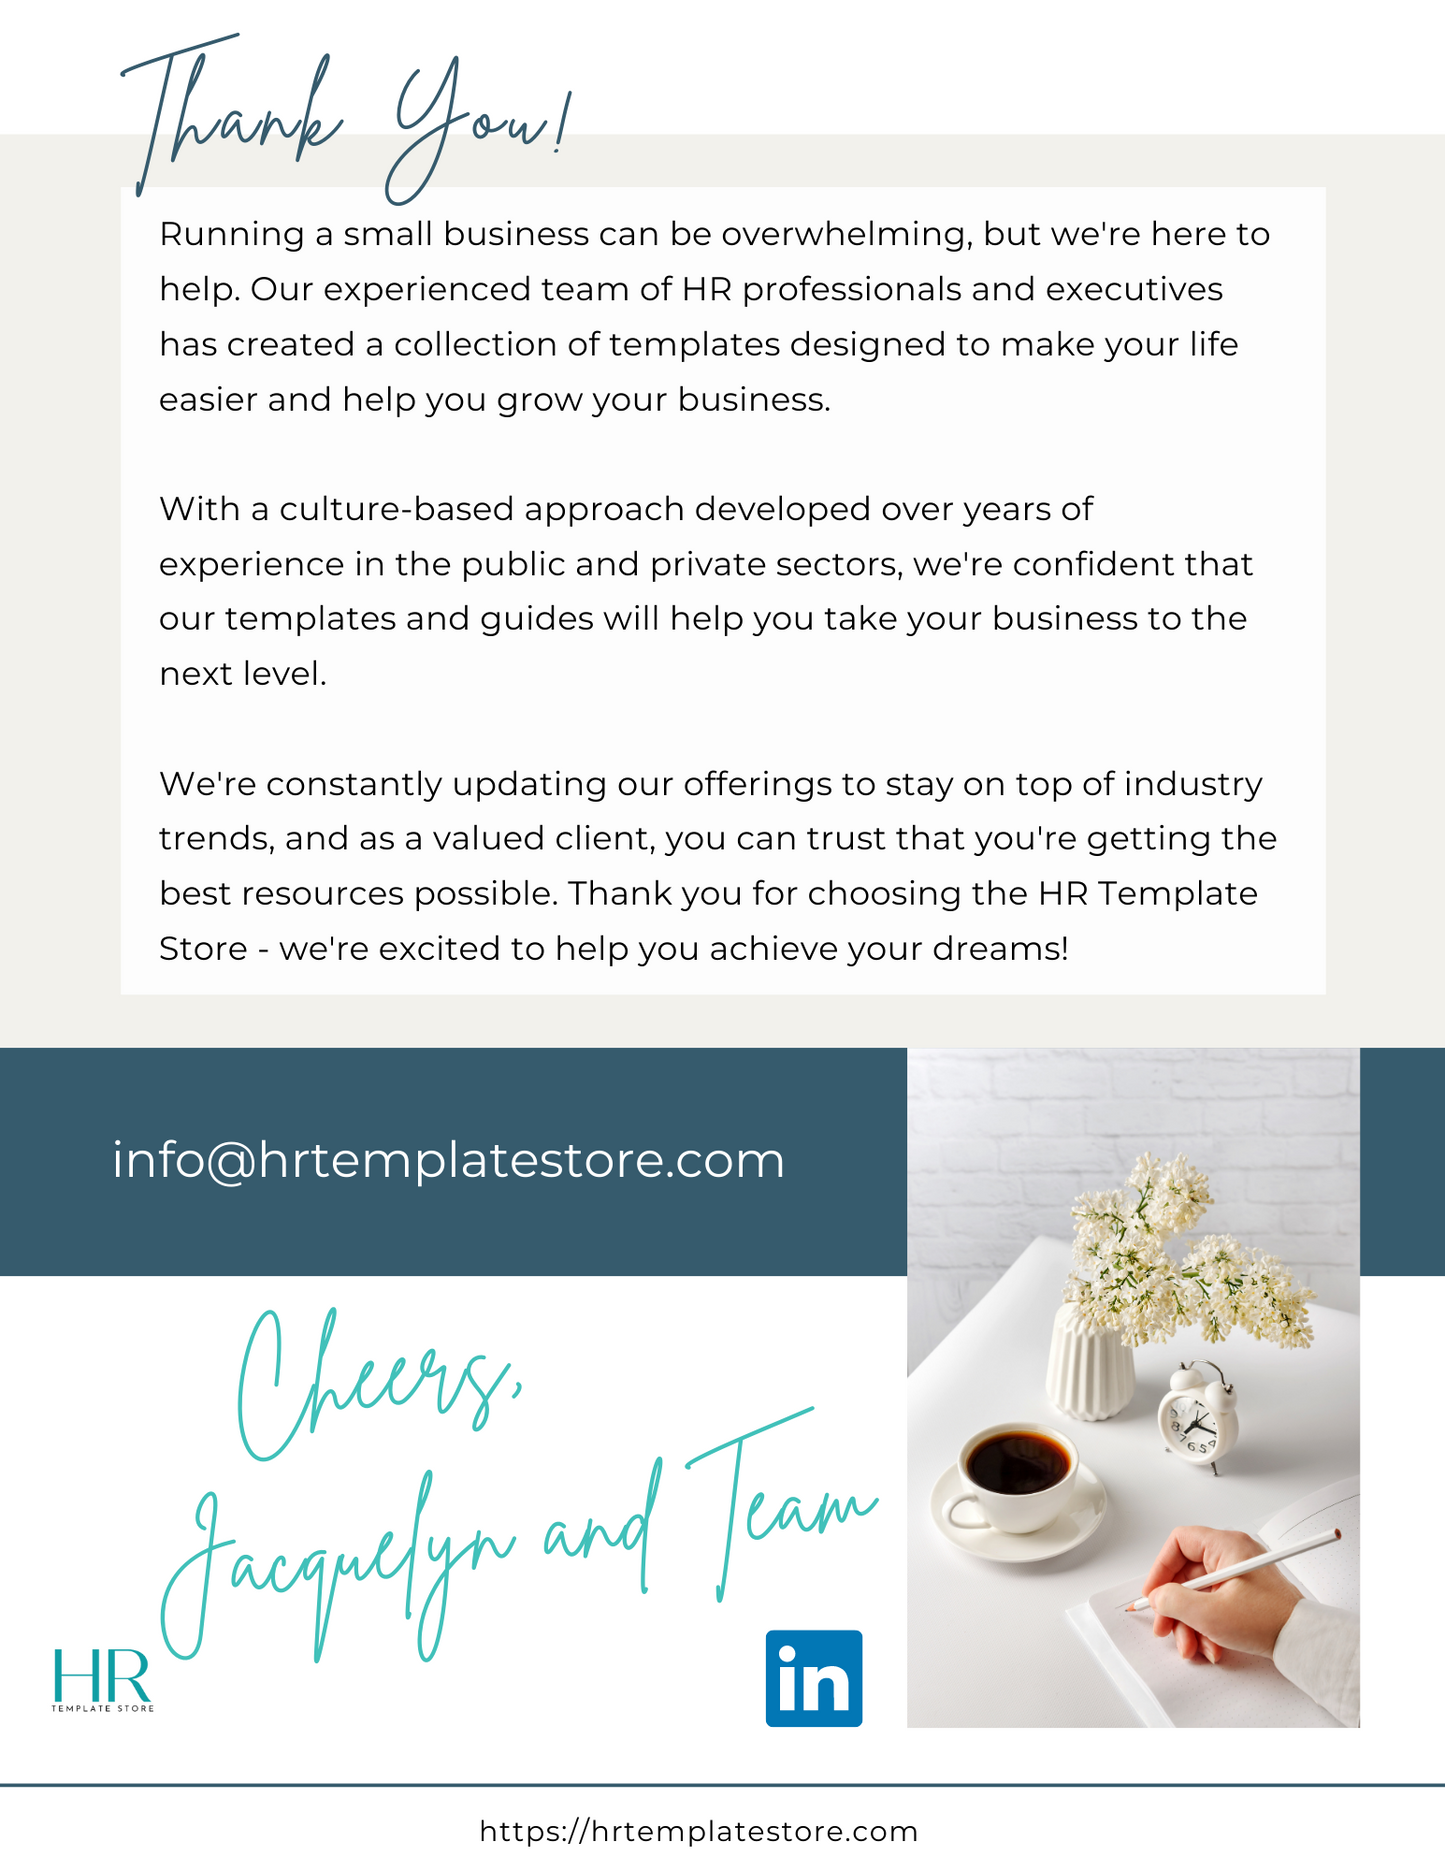 Cheers - A Grateful Handshake - Thank You for Using Our Candidate Evaluation Tool. Your Trust in HR Template Store's Solution is Appreciated. We Value Your Partnership in Streamlining Hiring Processes.